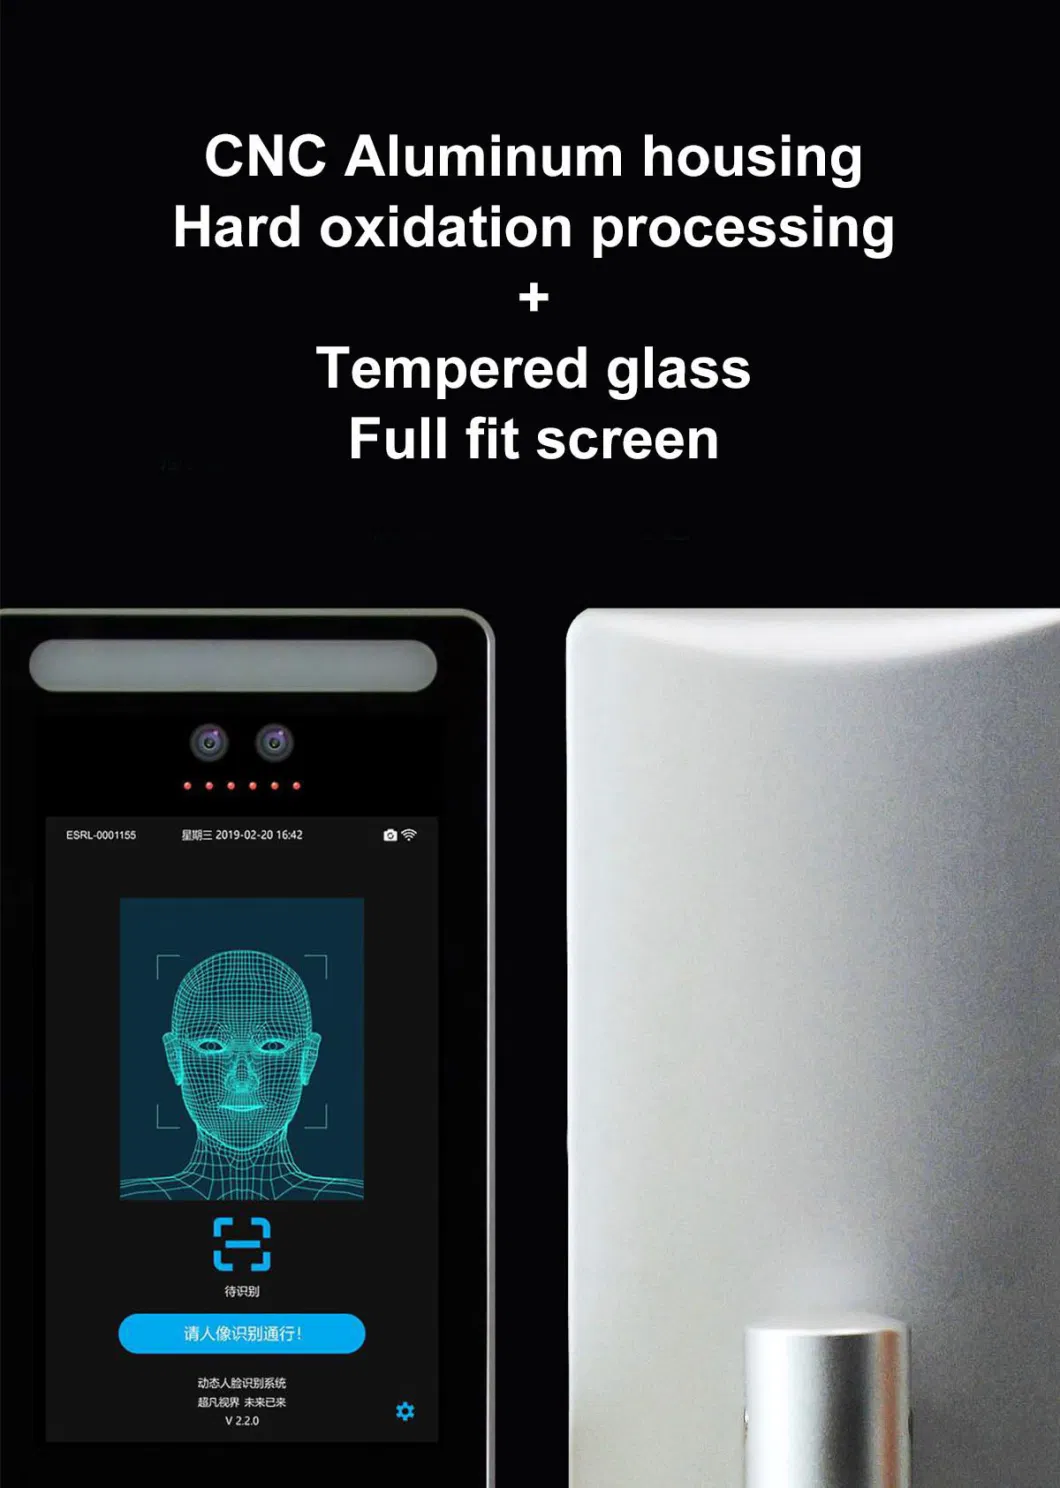 8 Inch Touch Screen Face Recognition+Temperature Thermometer Mask Detection+Attendance Integrated Machine